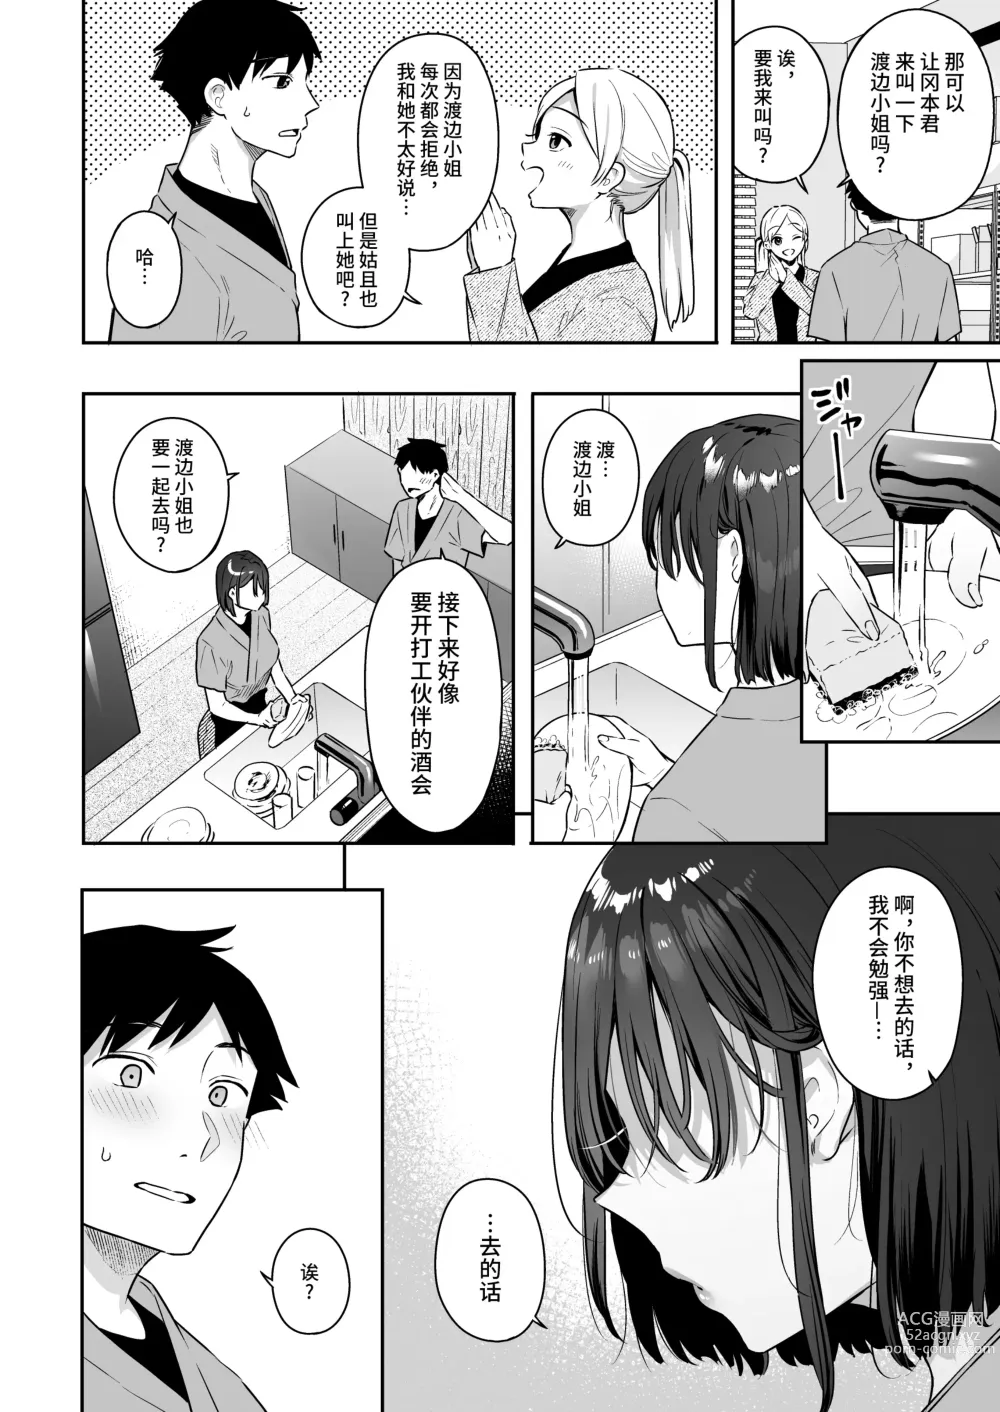 Page 8 of doujinshi 她的发情开关